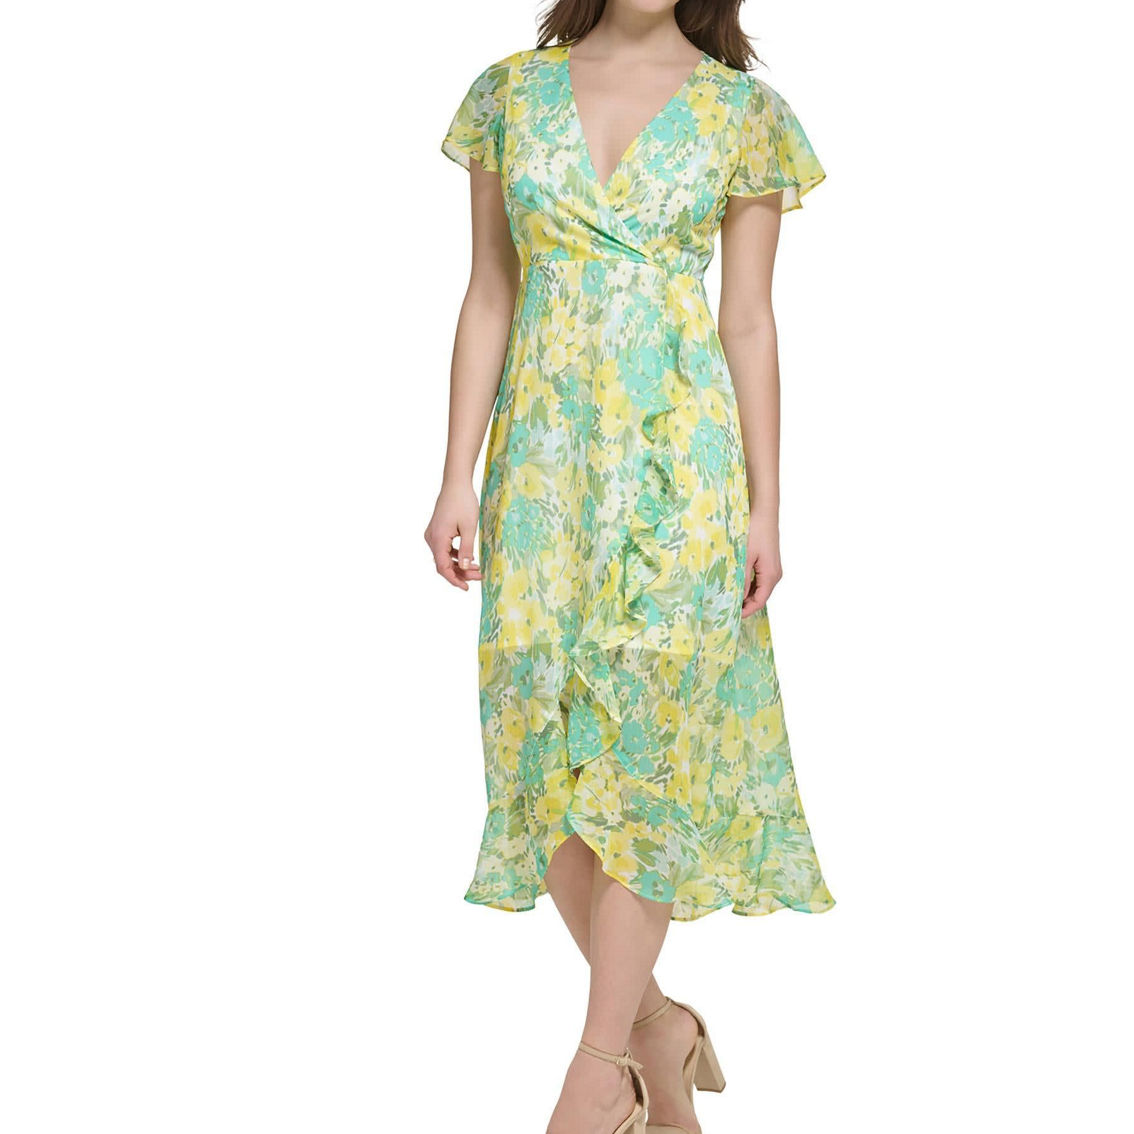 Womens Chiffon Floral Print Cocktail and Party Dress - Image 2 of 2